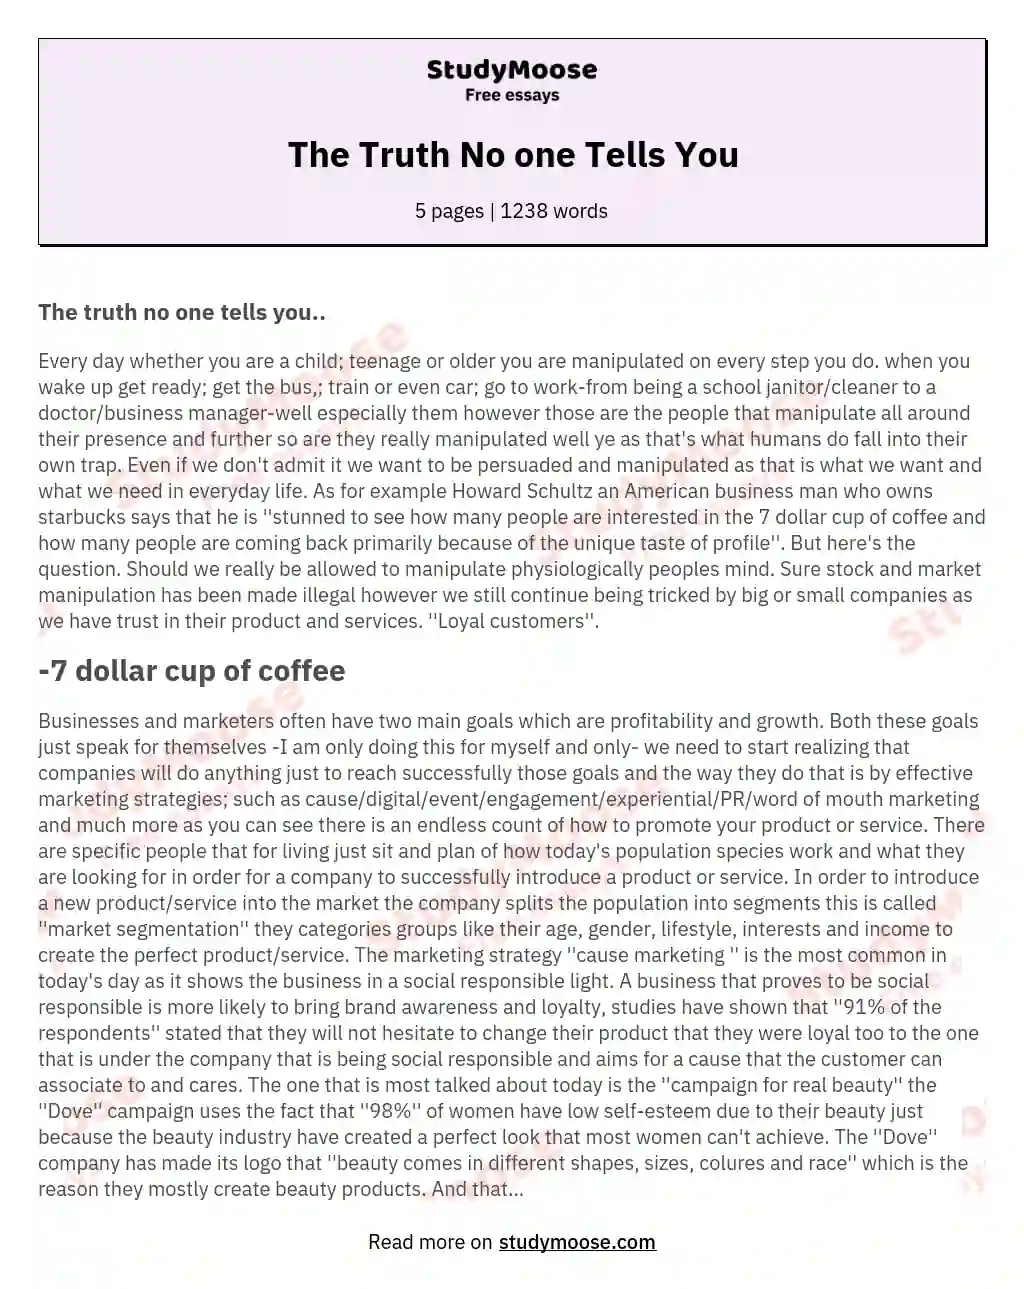 The Truth No one Tells You essay